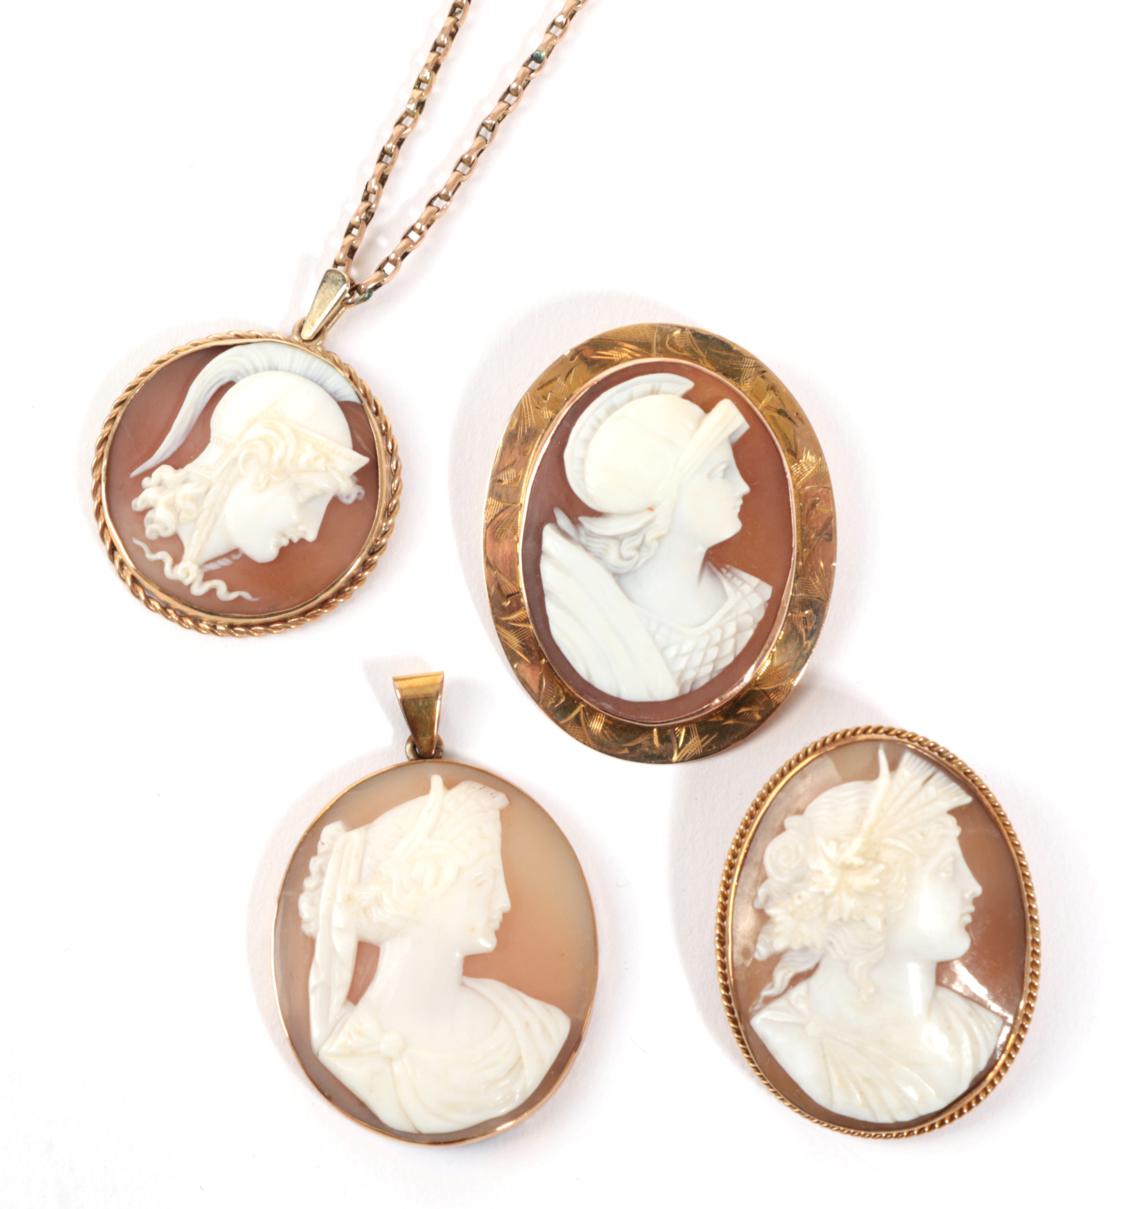 A Cameo Pendant, depicting Ares on a chain, in a round rope twist frame, measures 3cm by 3.7cm,